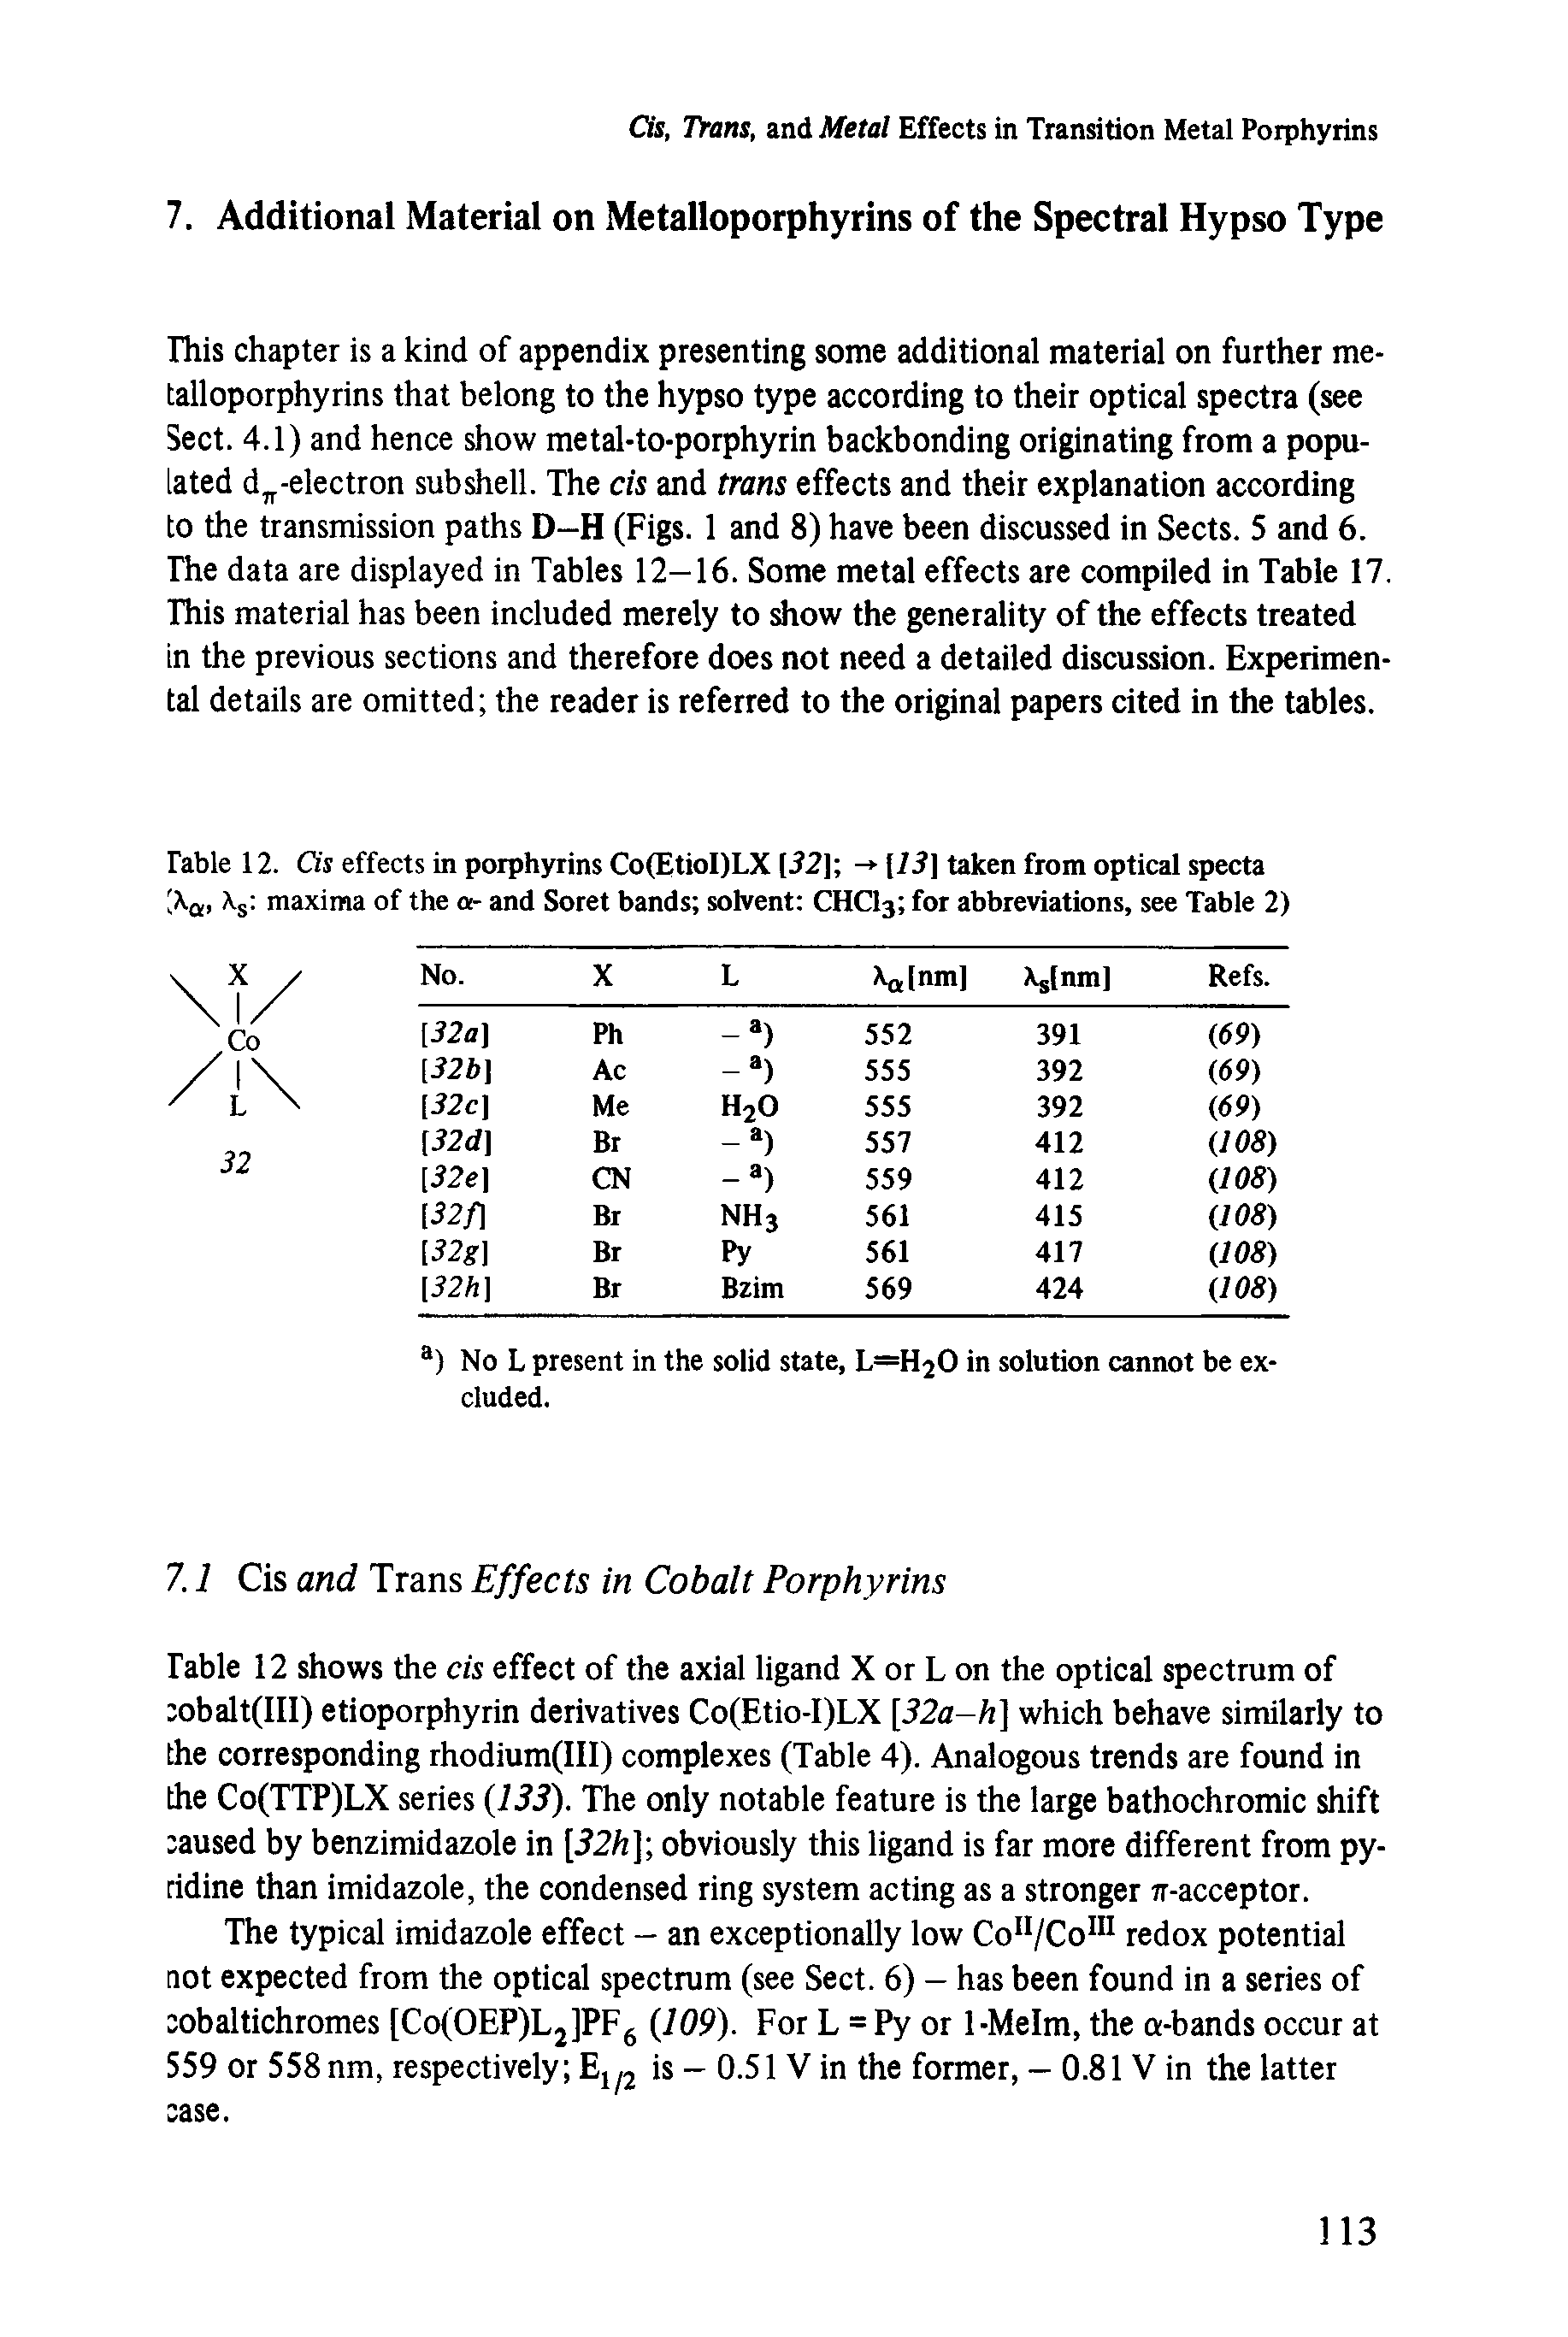 Table 12 shows the cis effect of the axial ligand X or L on the optical spectrum of cobalt(III) etioporphyrin derivatives Co(Etio-I)LX [32a-h] which behave similarly to the corresponding rhodium(III) complexes (Table 4). Analogous trends are found in the Co(TTP)LX series (133). The only notable feature is the large bathochromic shift caused by benzimidazole in [32h] obviously this ligand is far more different from pyridine than imidazole, the condensed ring system acting as a stronger 7r-acceptor.